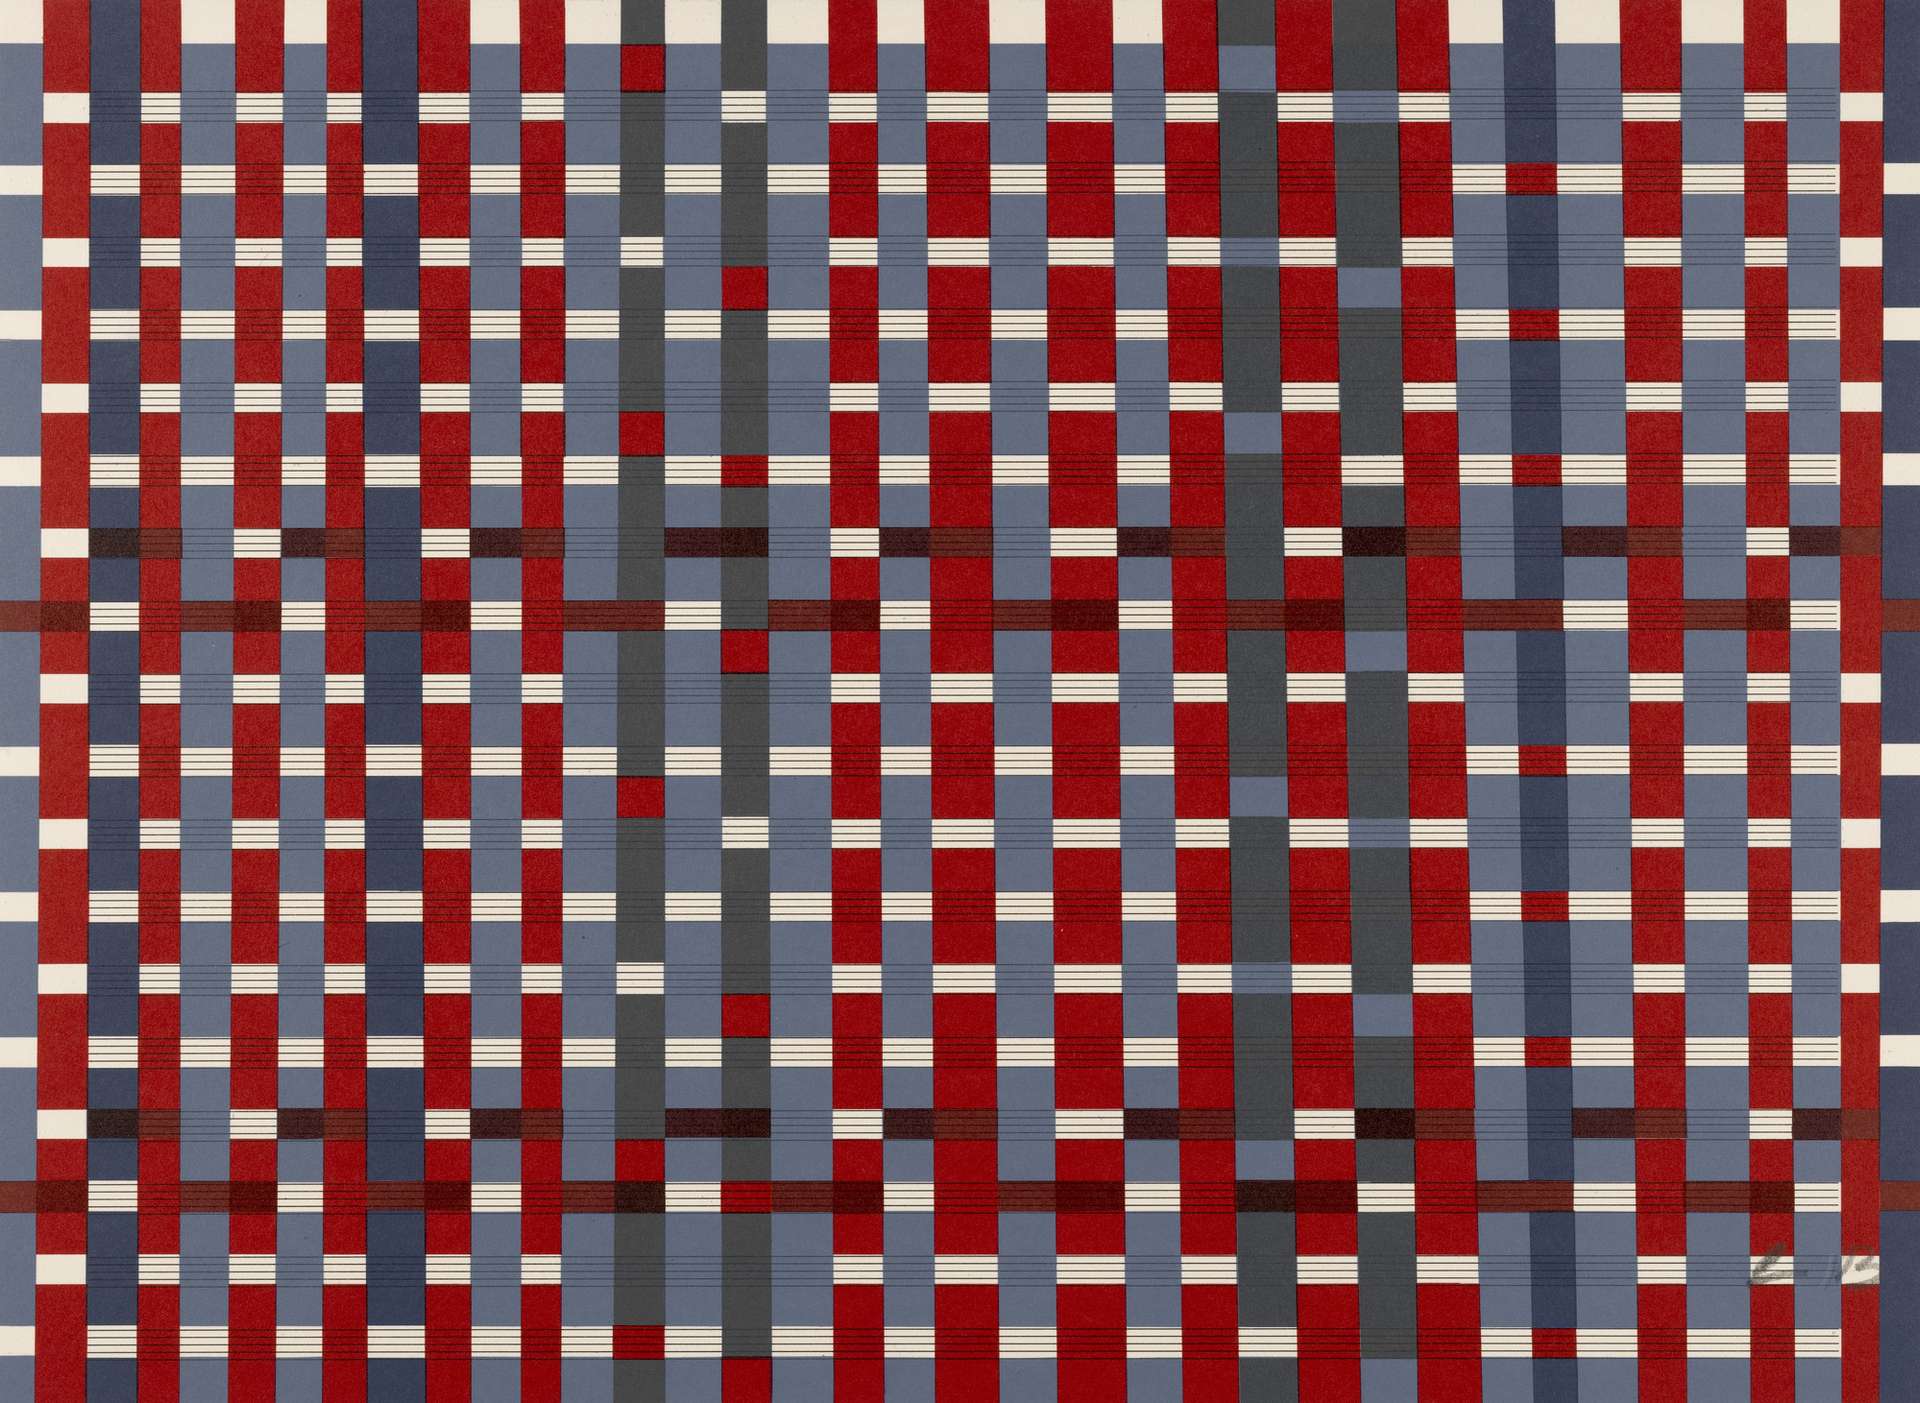 Louise Bourgeois’ Untitled #19. A screenprint of red, blue, and grey tones against a pattern of horizontal lines.